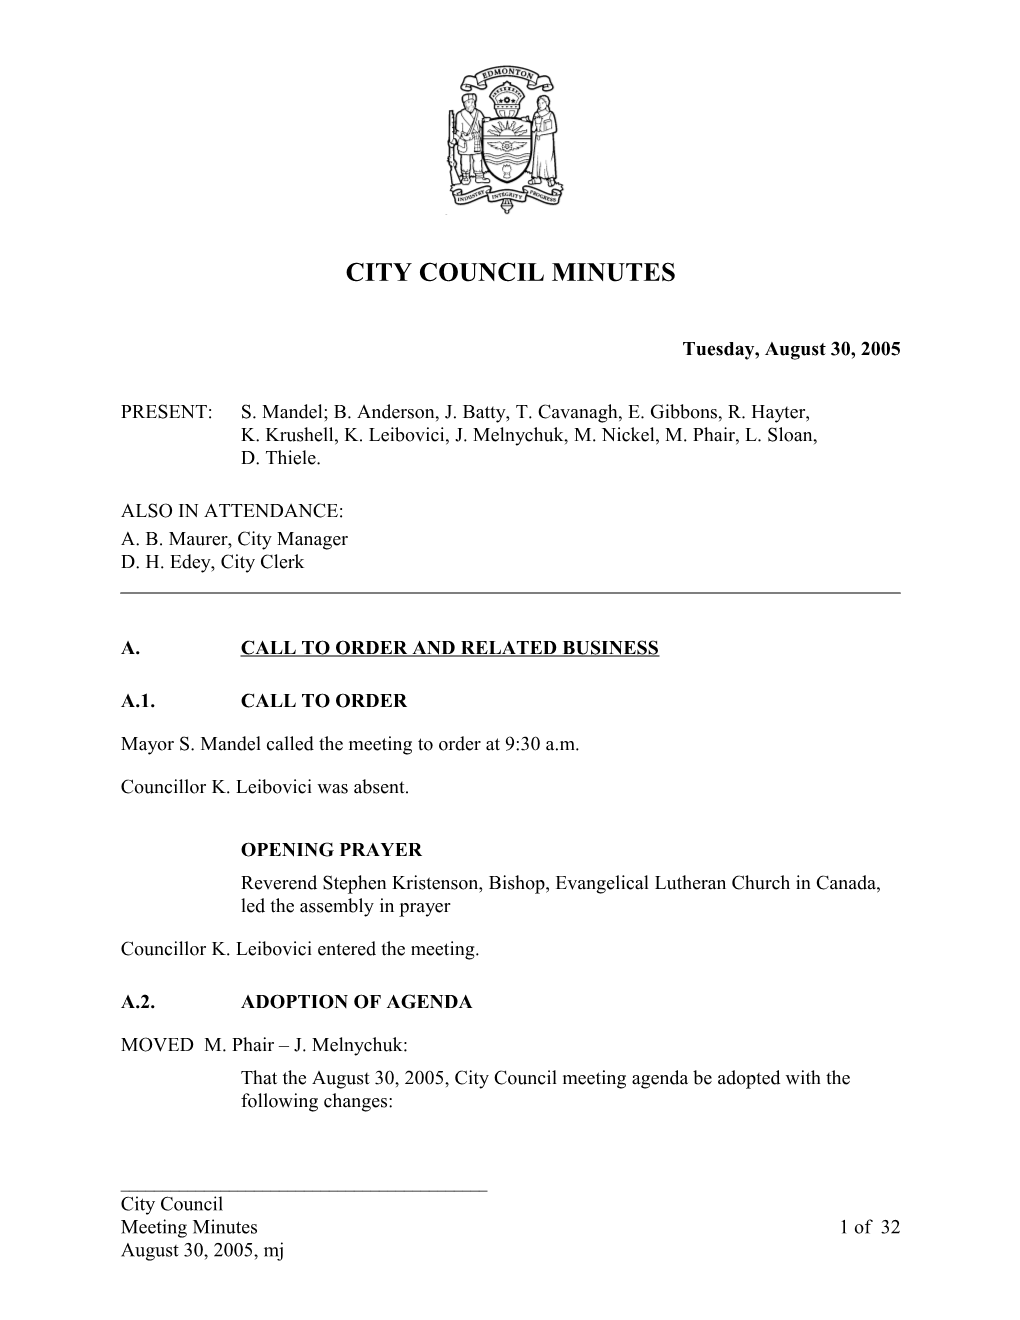 Minutes for City Council August 30, 2005 Meeting